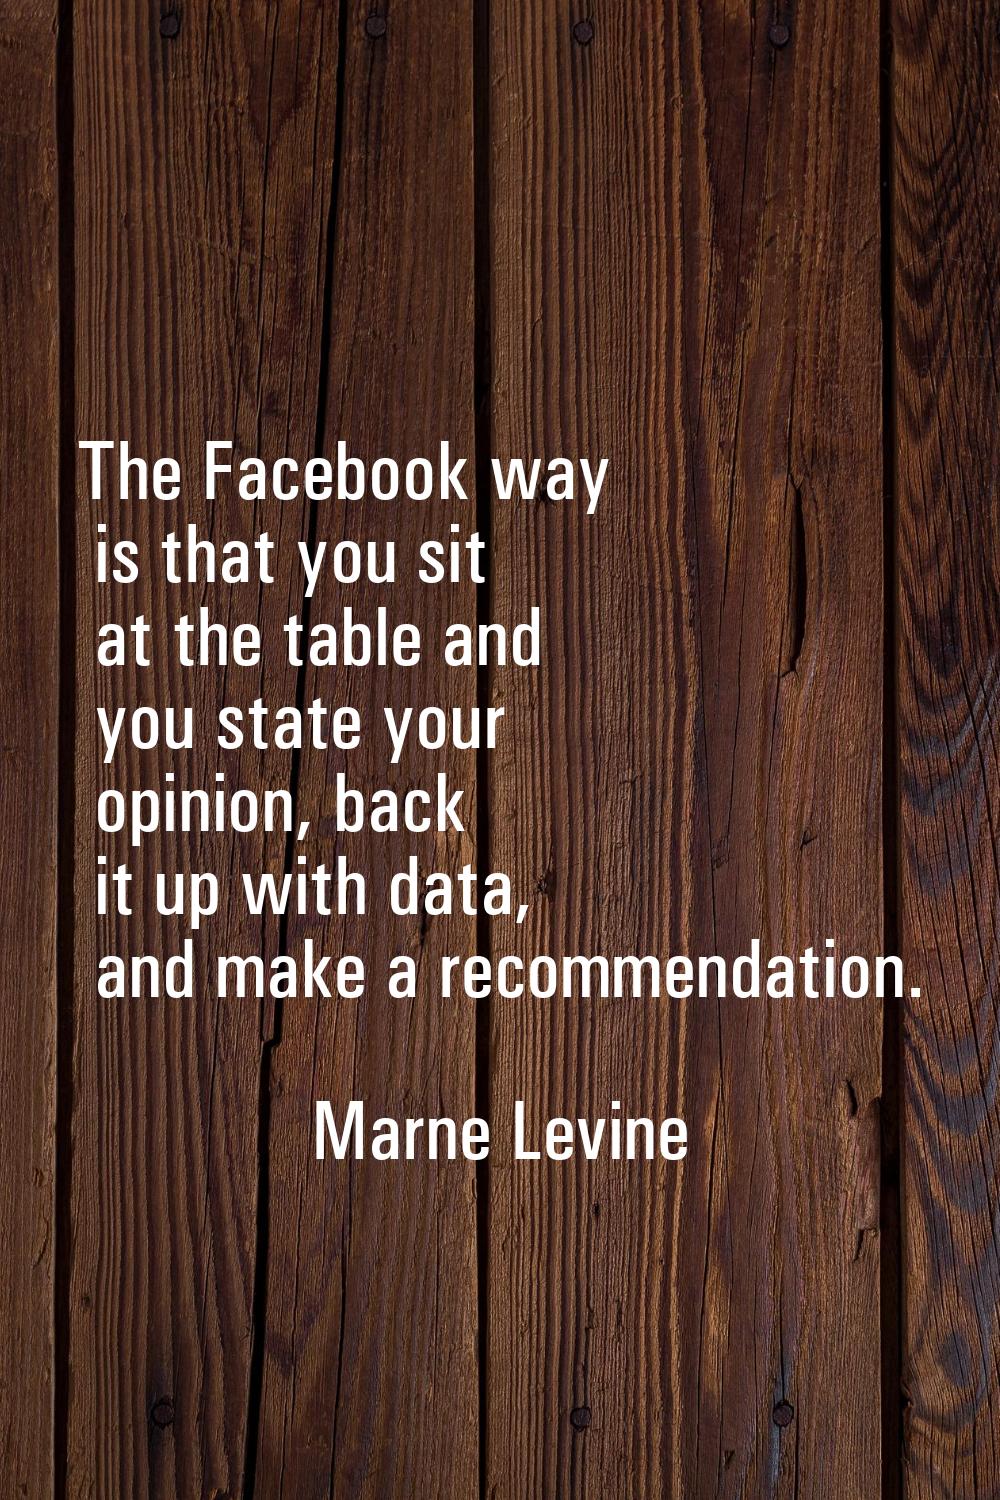 The Facebook way is that you sit at the table and you state your opinion, back it up with data, and